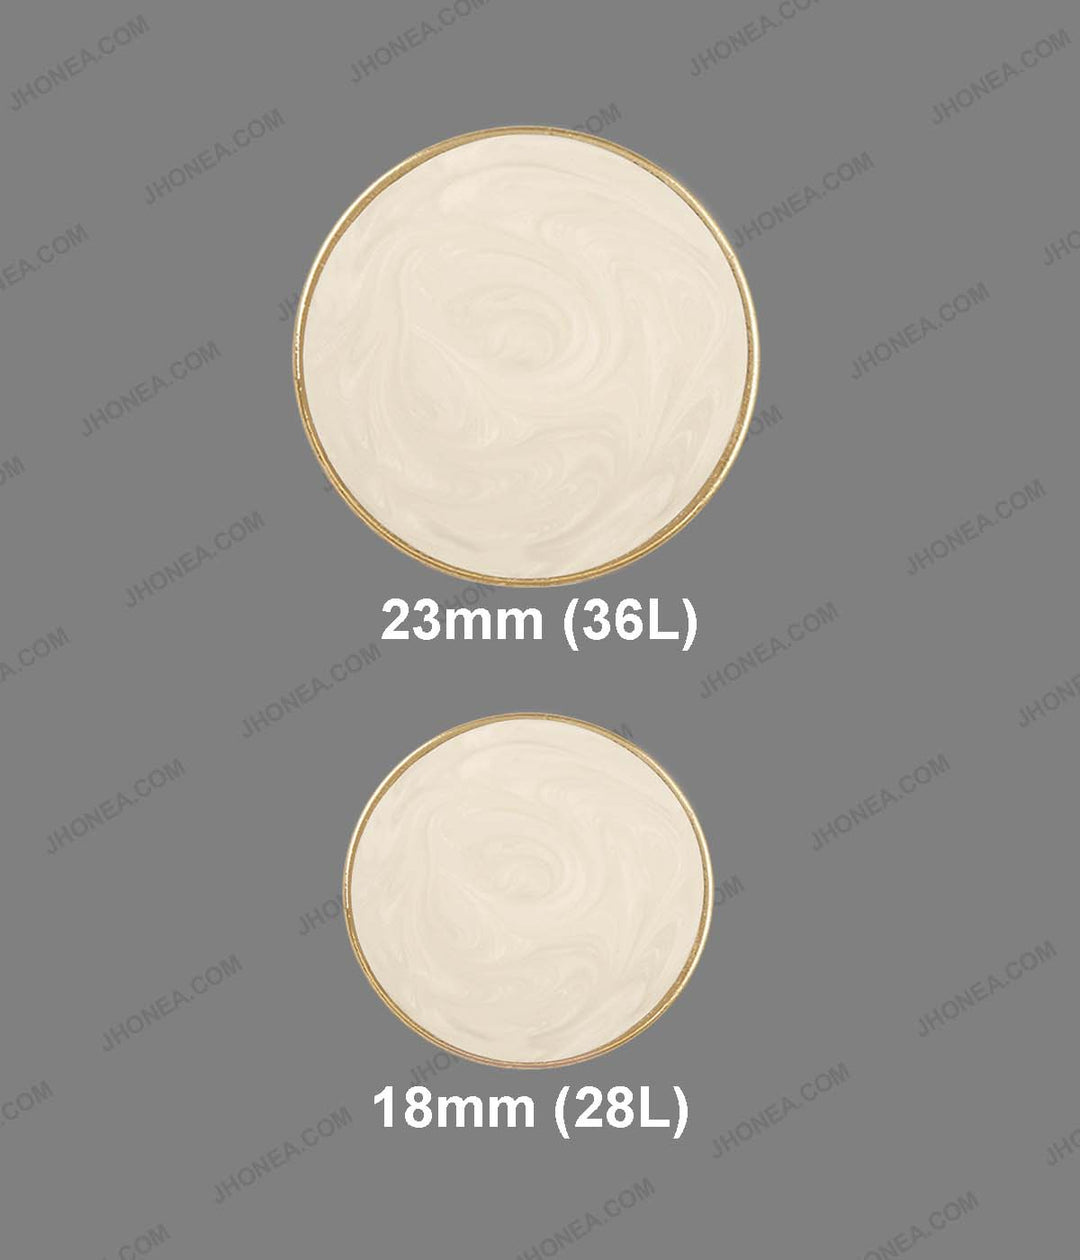 Premium Light Gold with White Color Marble Texture Decorative Metal Buttons